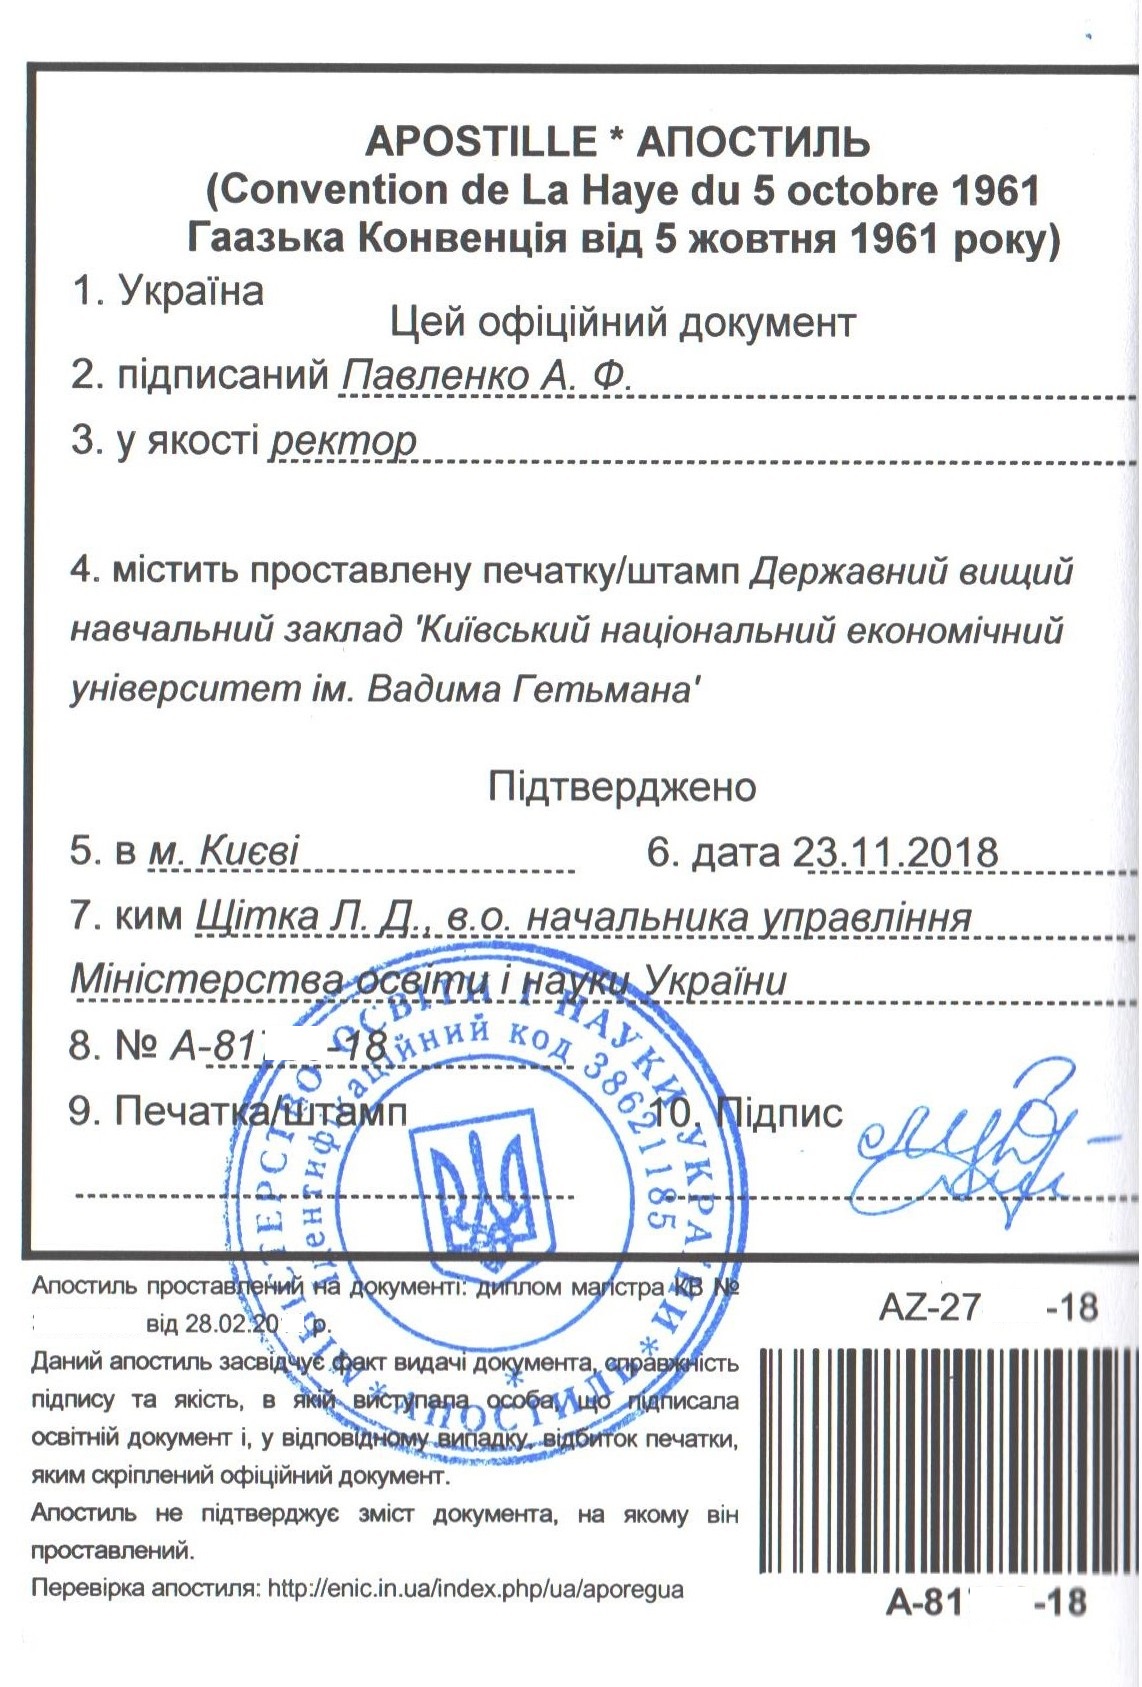 Apostille of Ministry of Education and Science of Ukraine